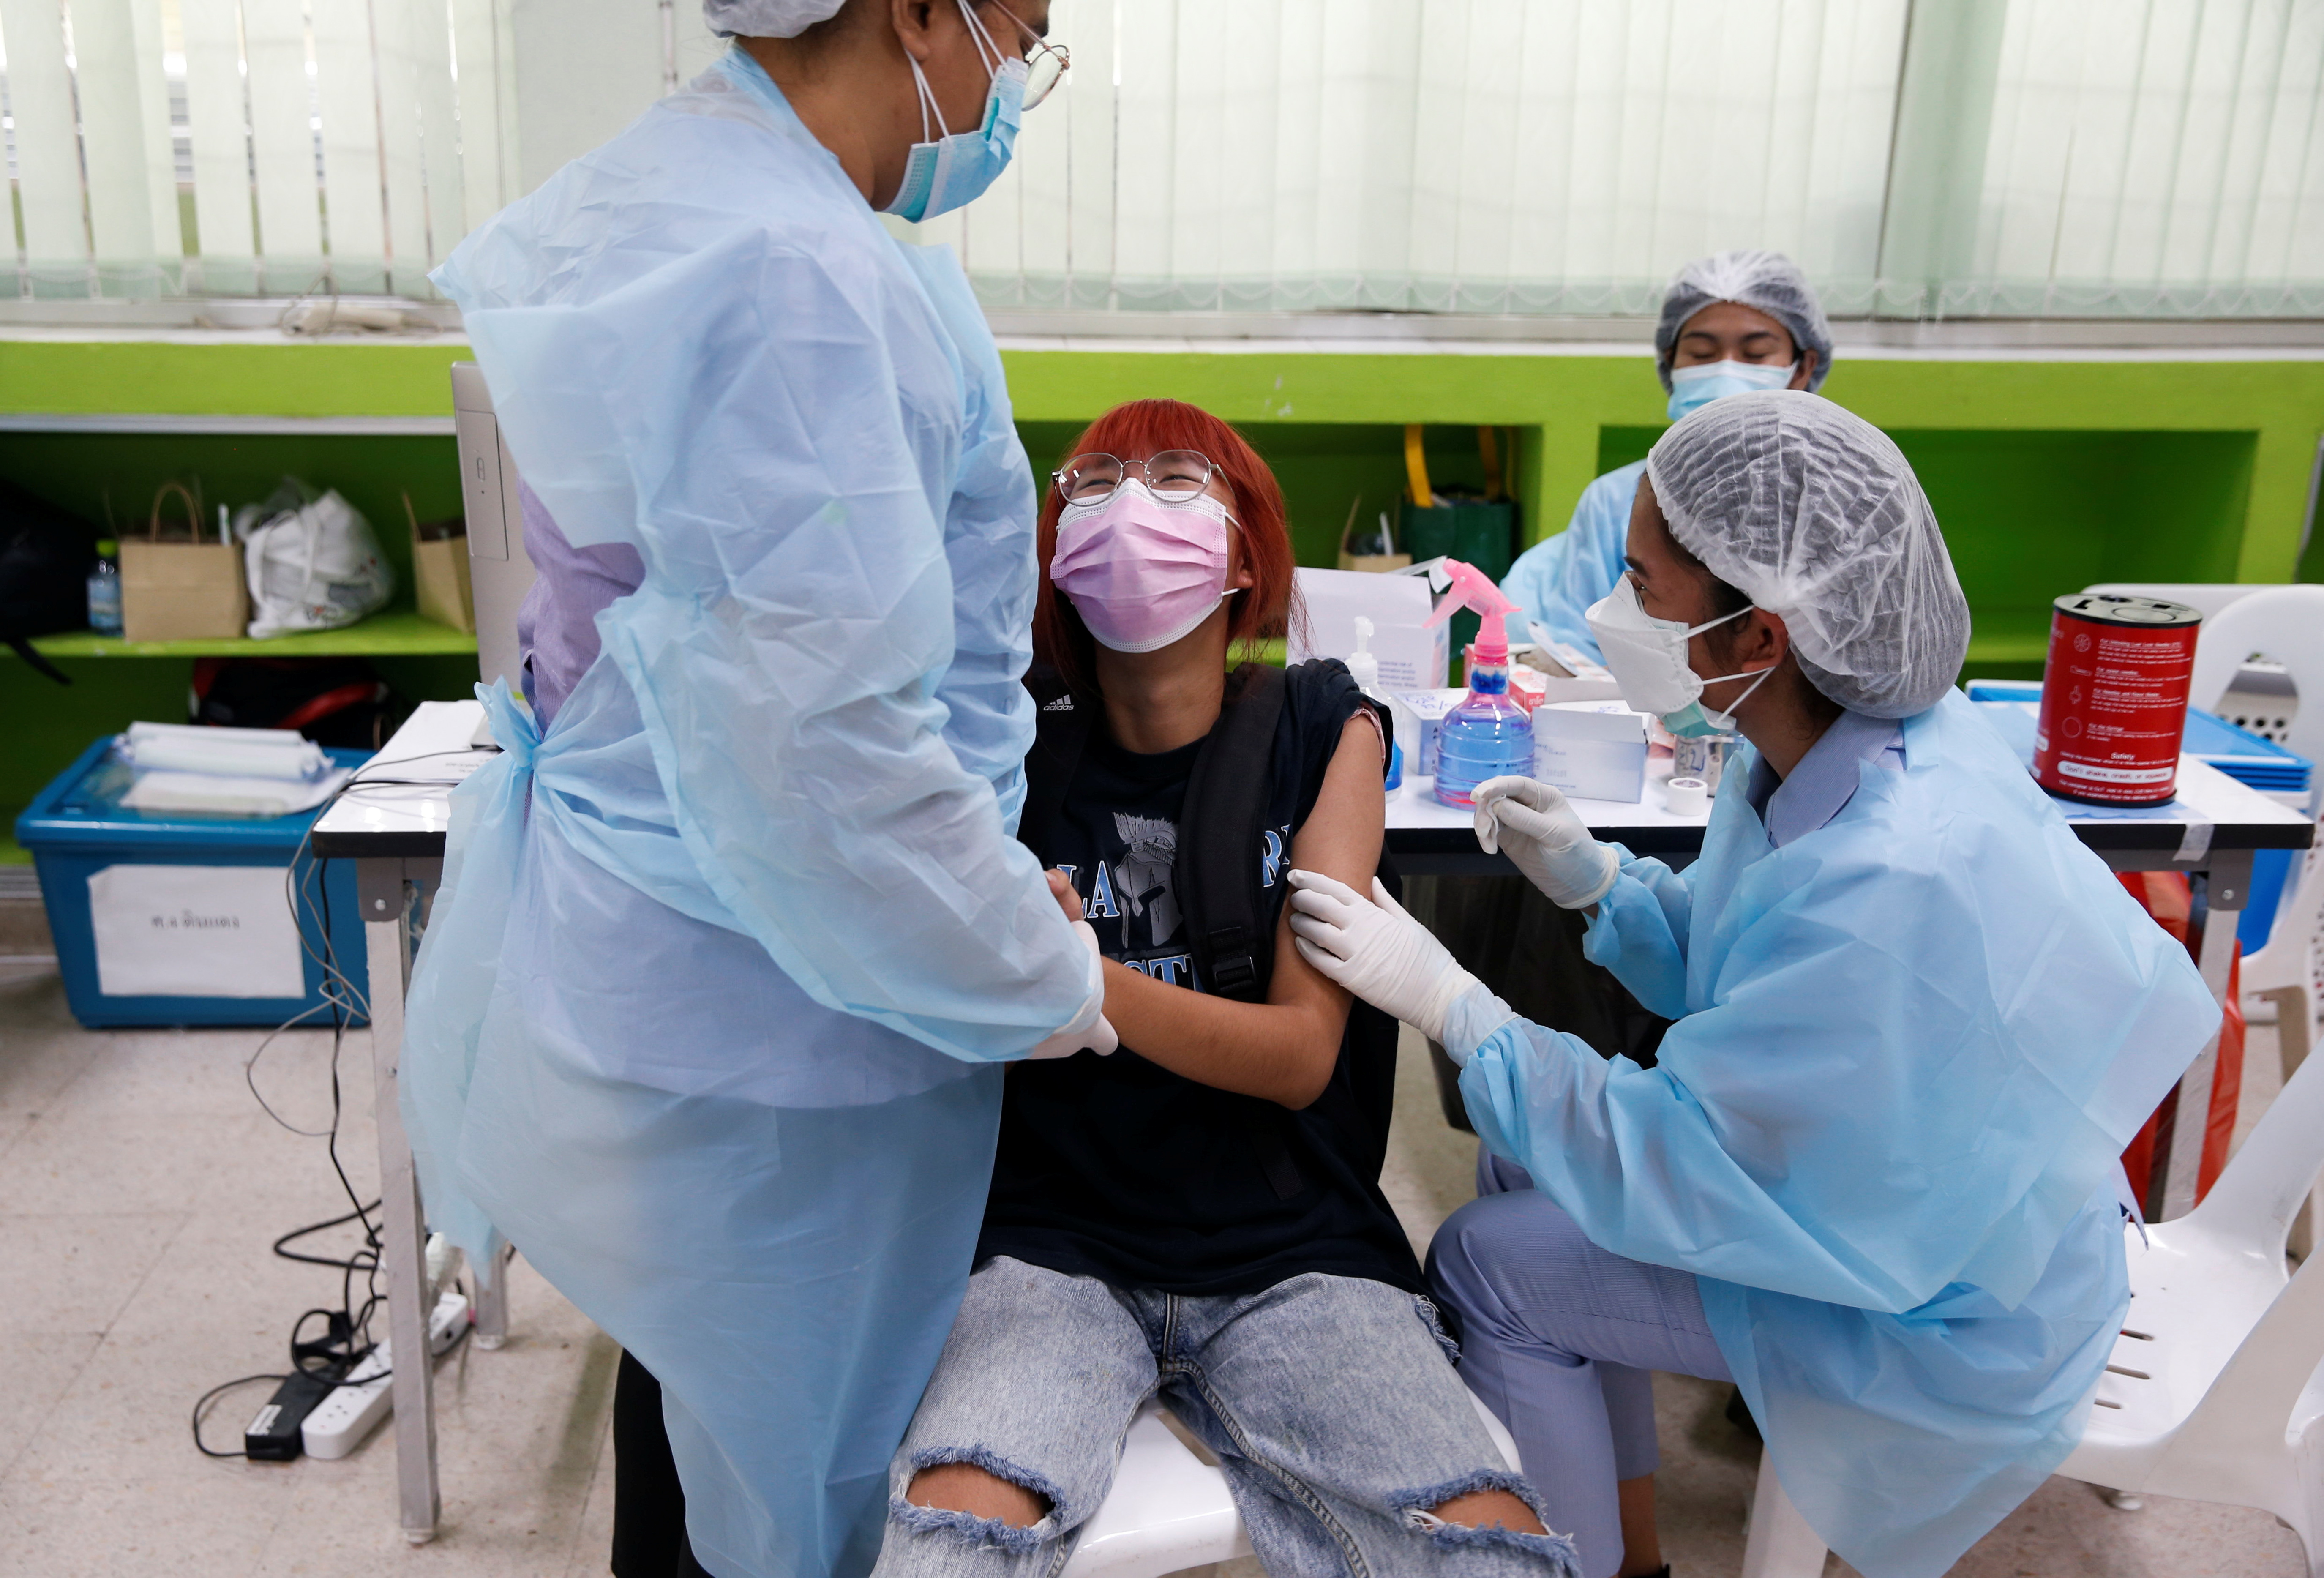 Ahead of schools reopening, high school students get vaccinated in Bangkok